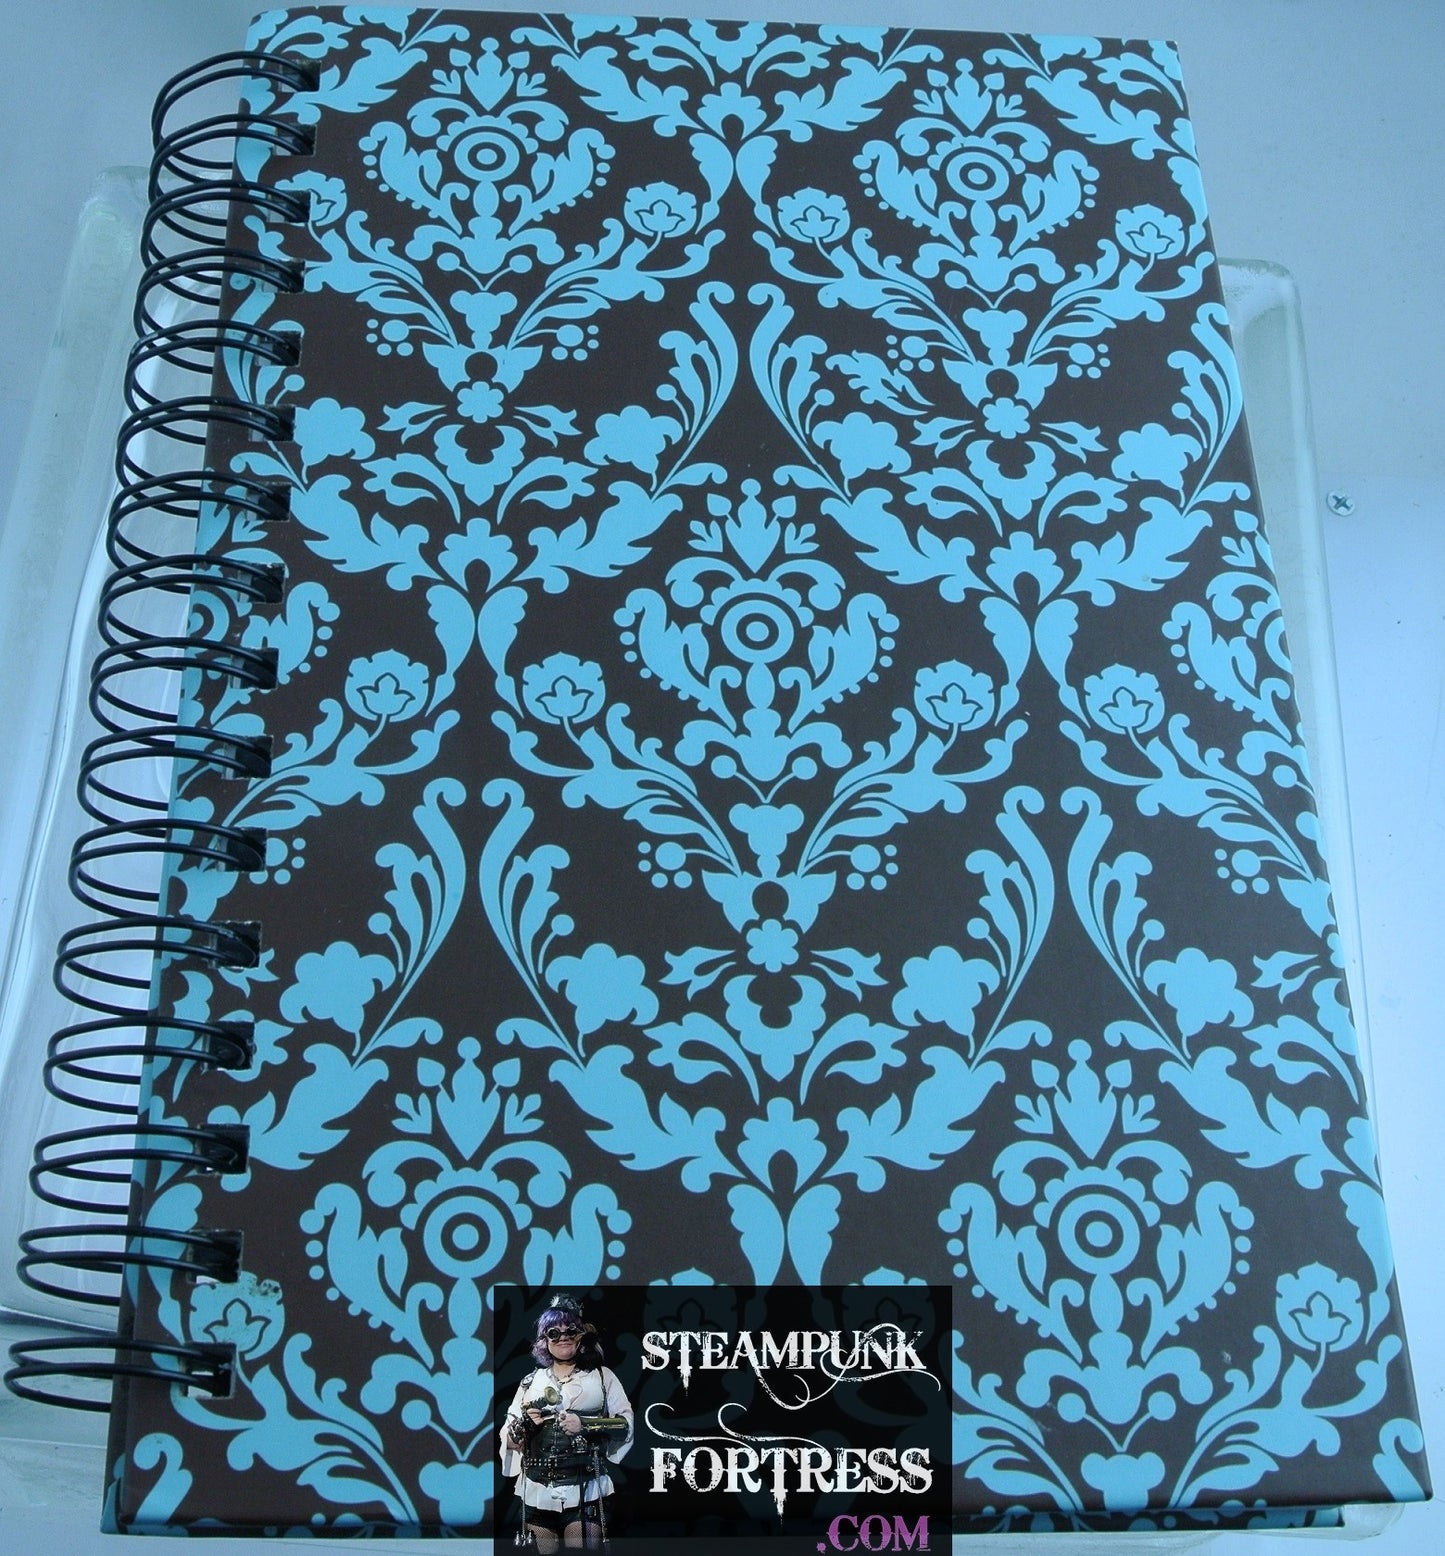 NOTEBOOK SPIRAL HARDCOVER BLUE BROWN PAISLEY 190 LINED PAGES TOTAL